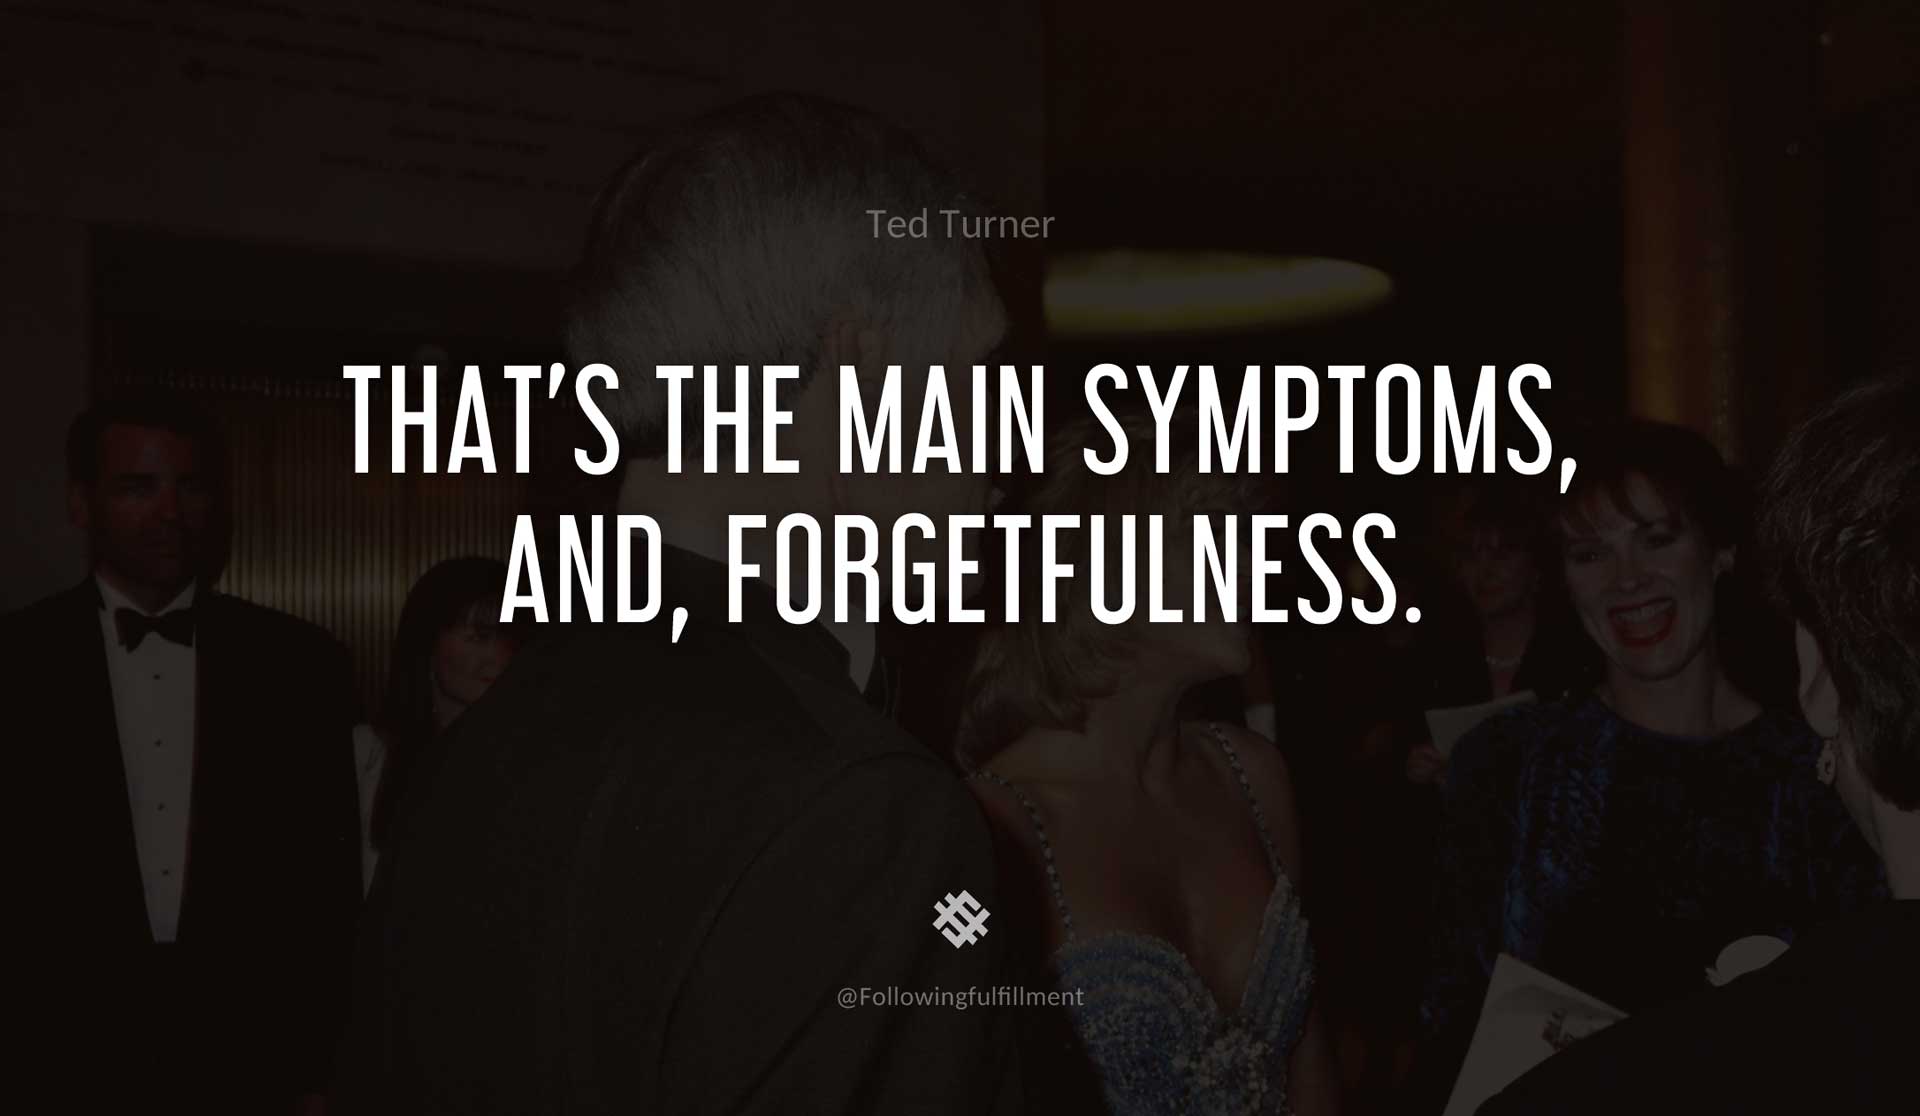 That's-the-main-symptoms,-and,-forgetfulness.-TED-TURNER-Quote.jpg